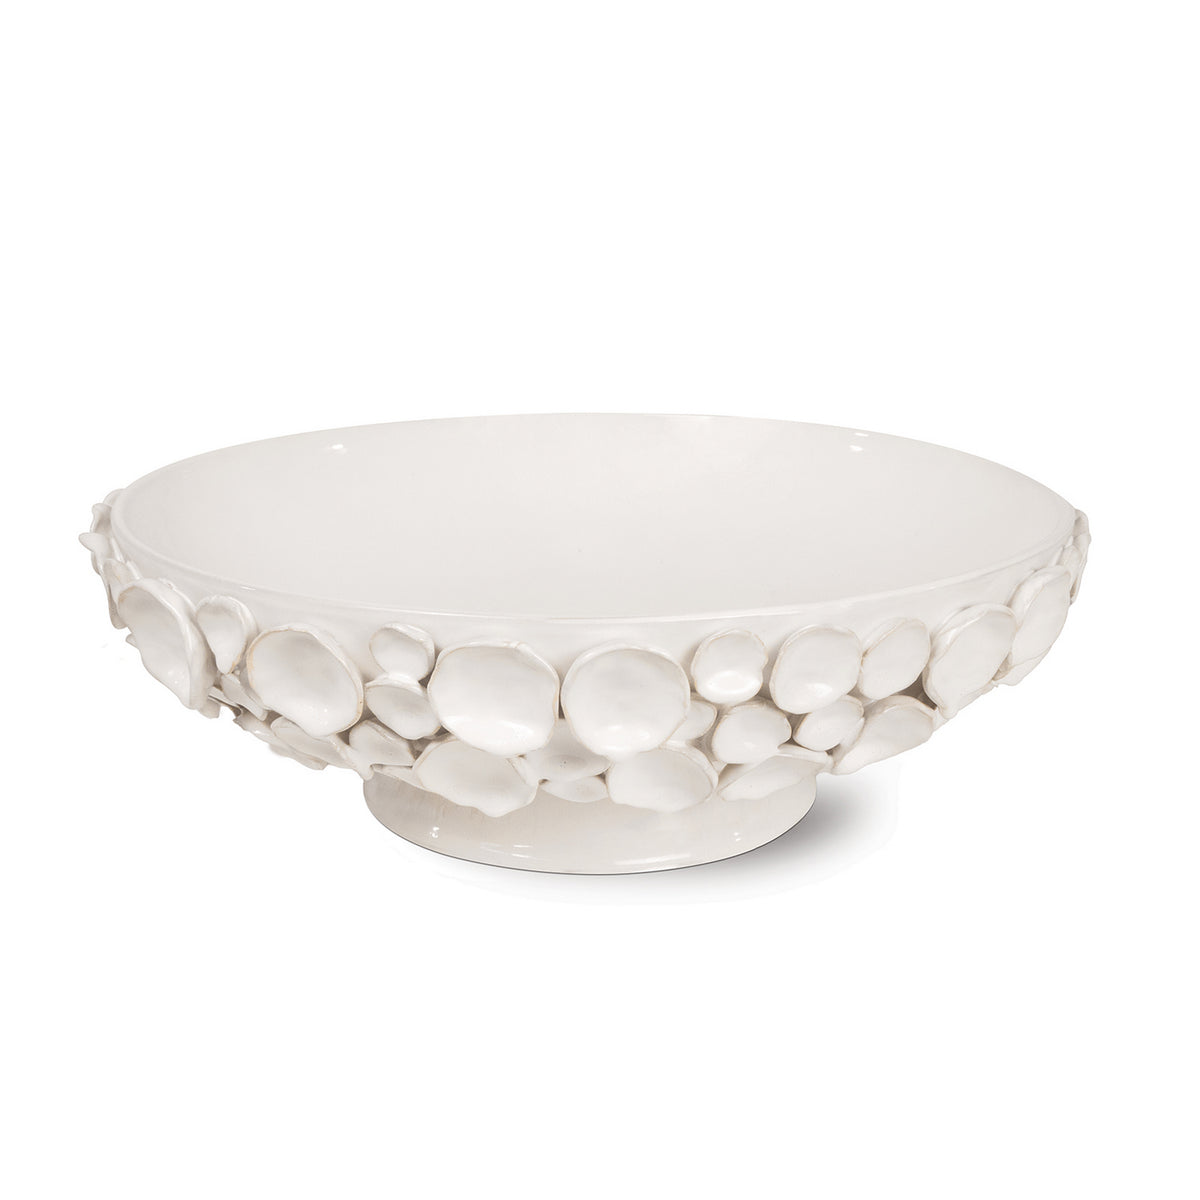 Regina Andrew Bowl from the Lucia collection in White finish